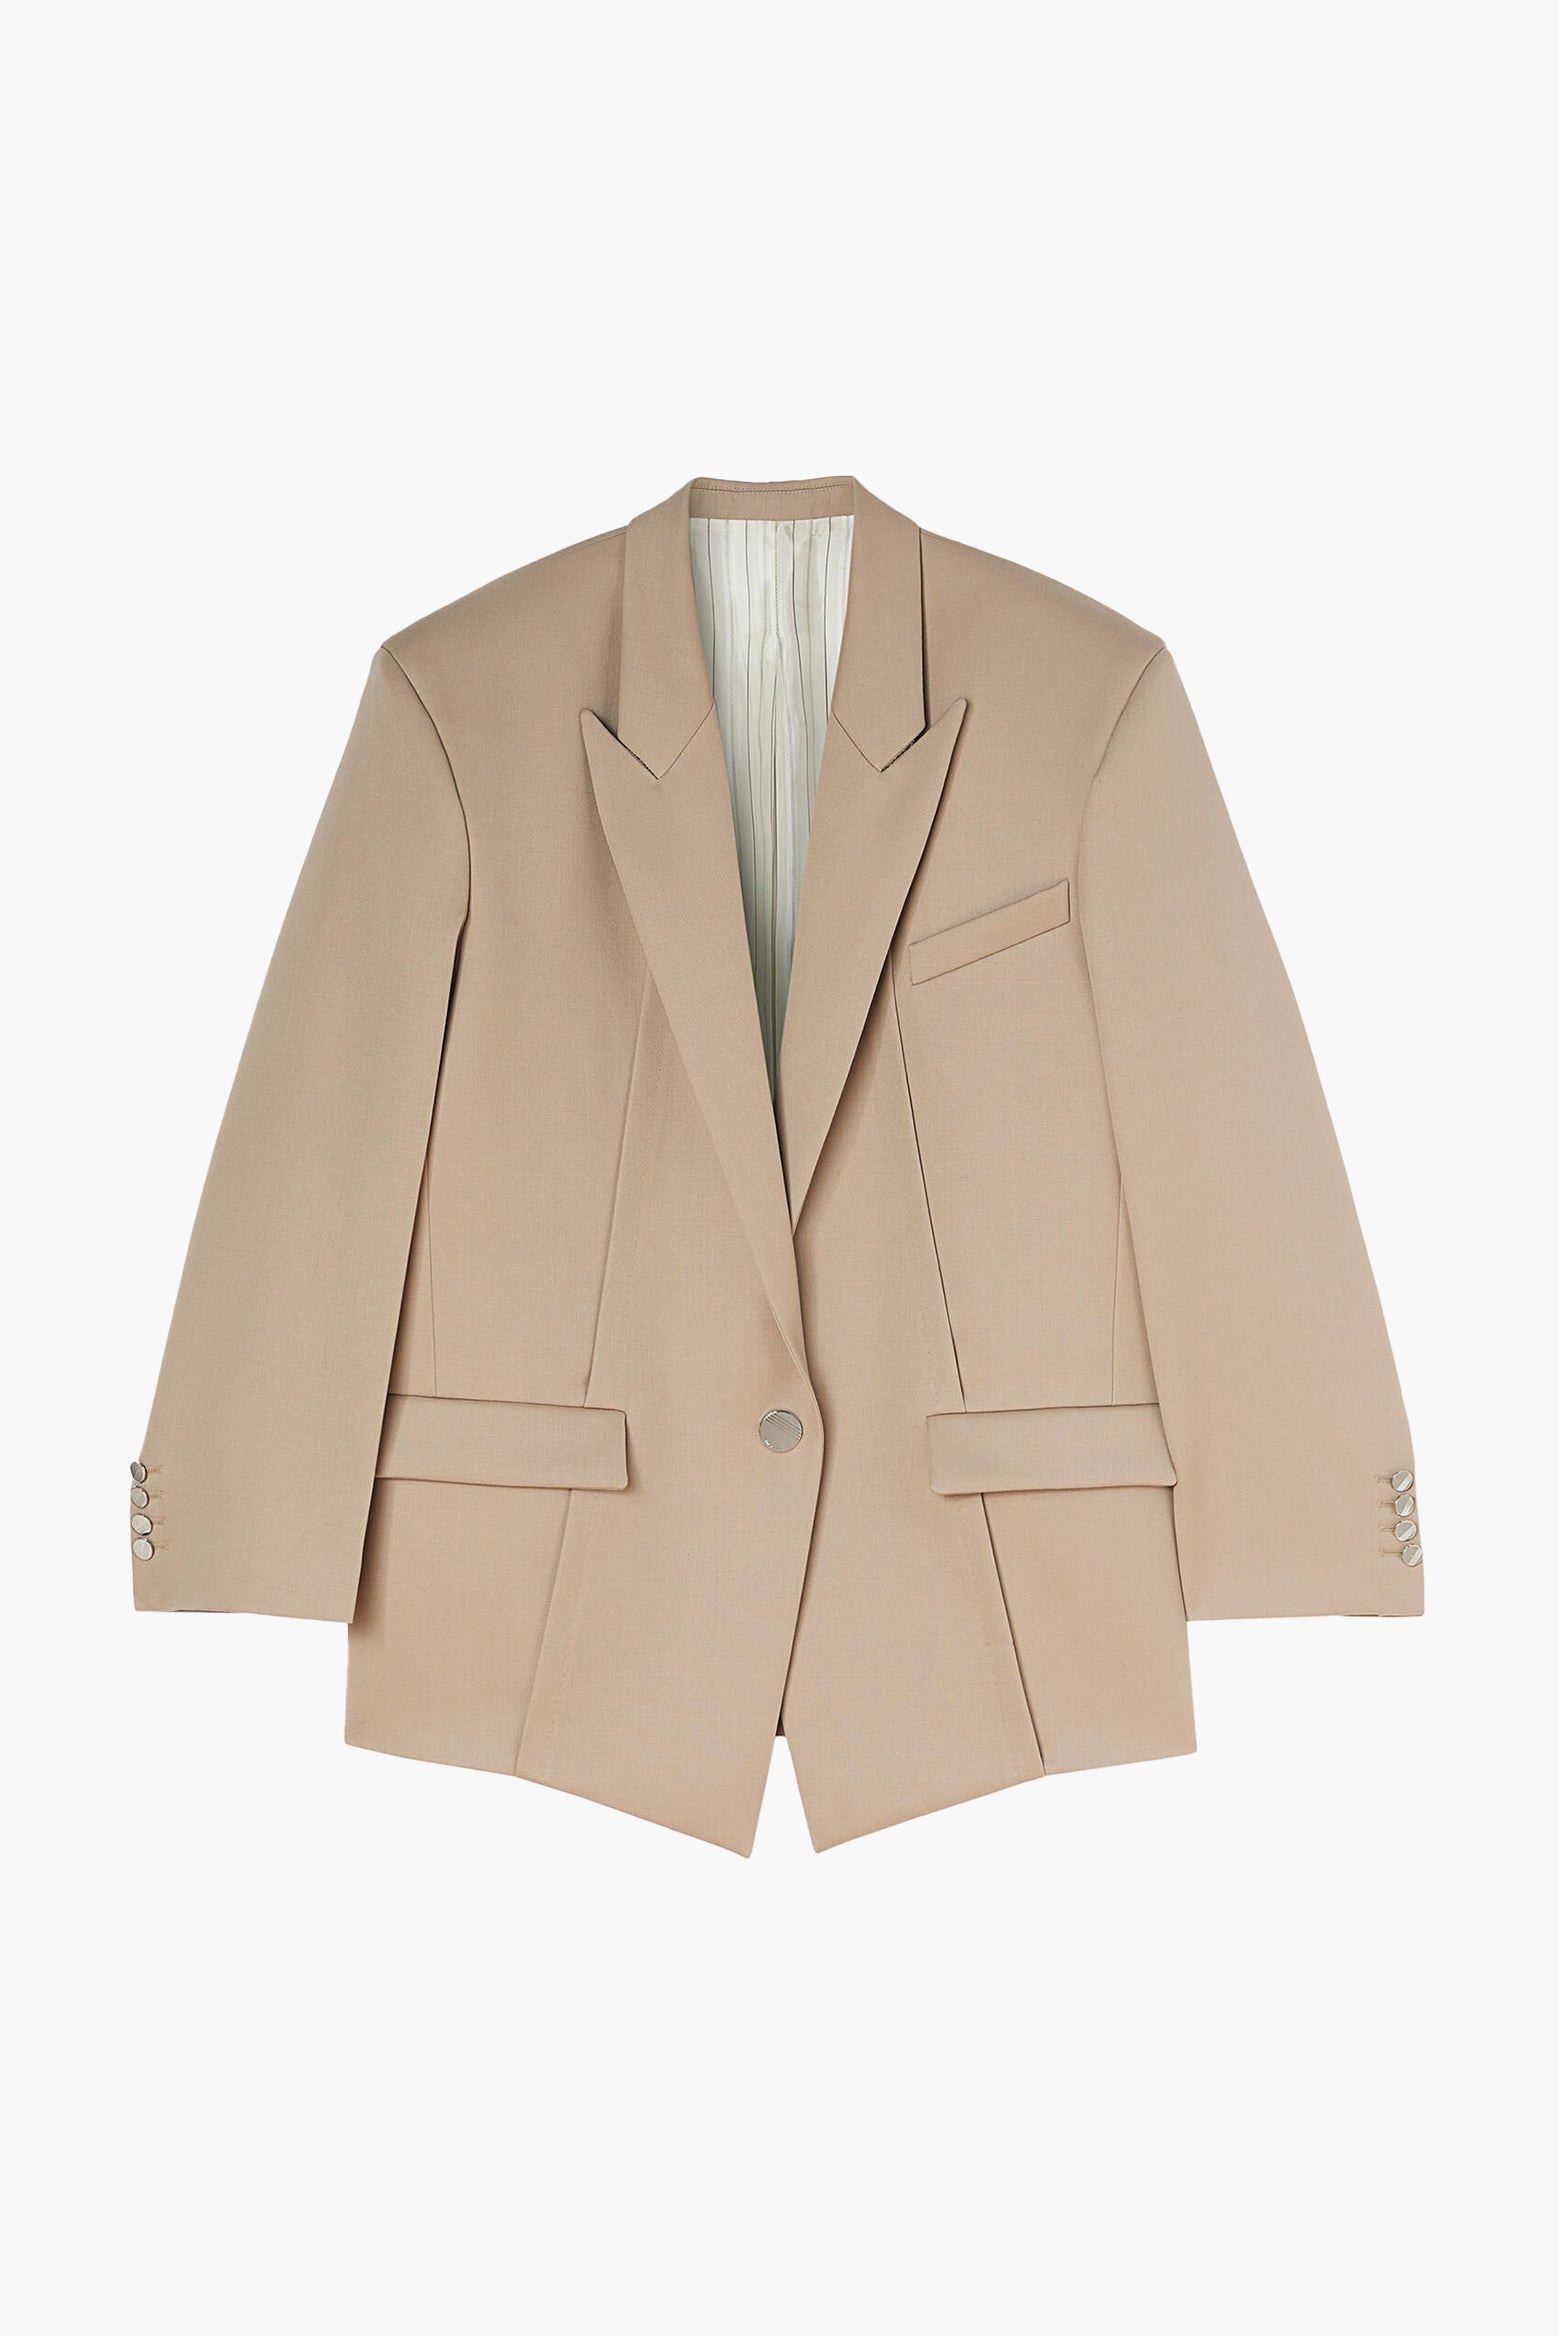 The Glen Blazer in Beige by The Attico available at The New Trend Australia